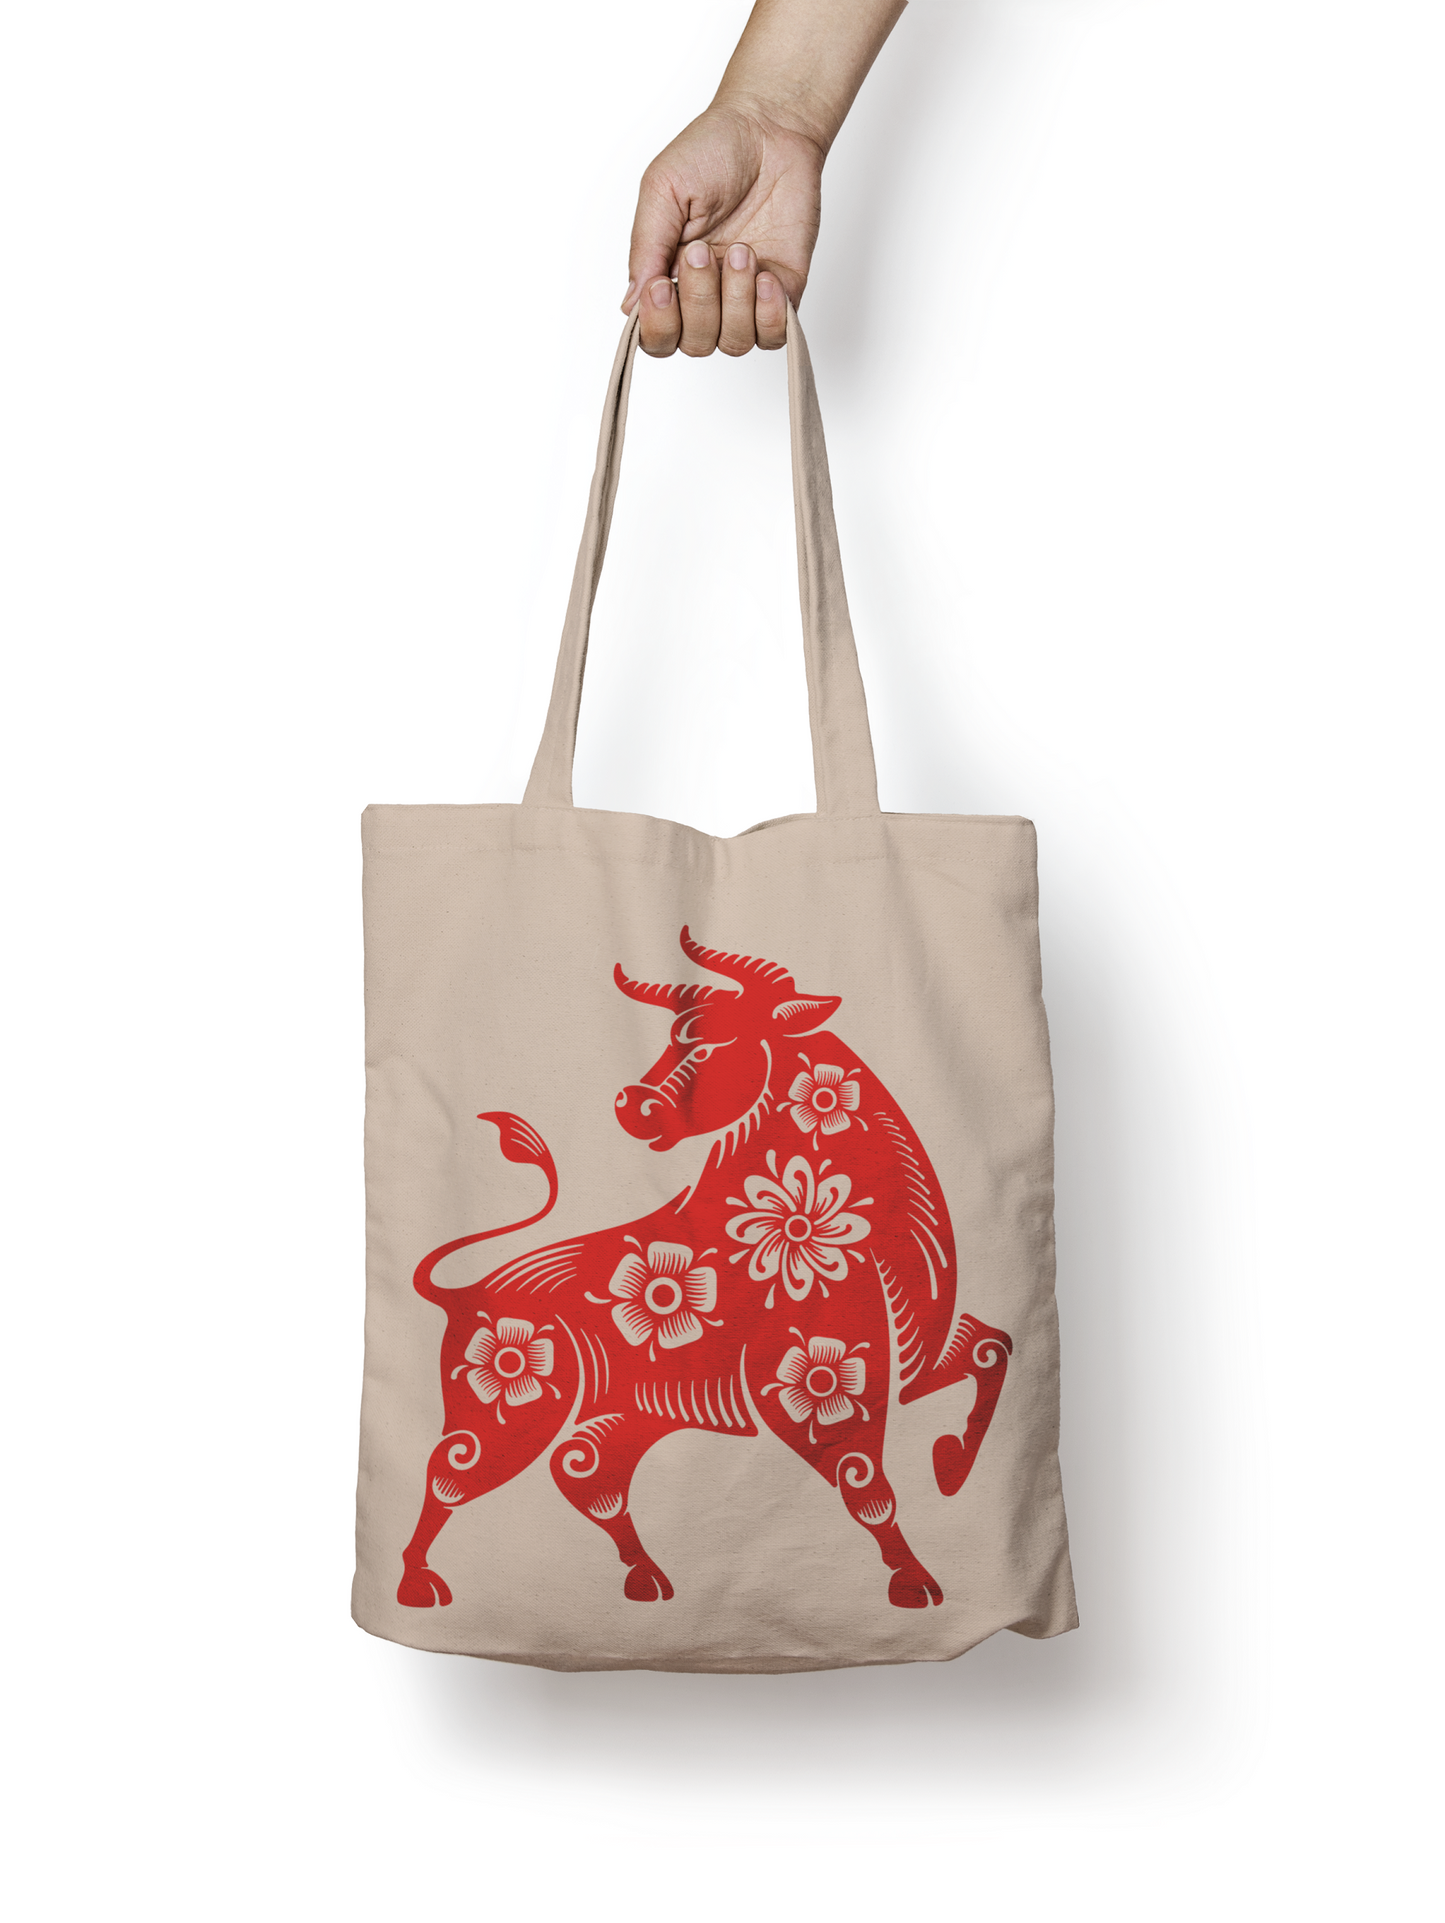 Year of the Ox Tote, Grocery Tote, Book Tote, Office Tote, 100% Cotton Fun Tote